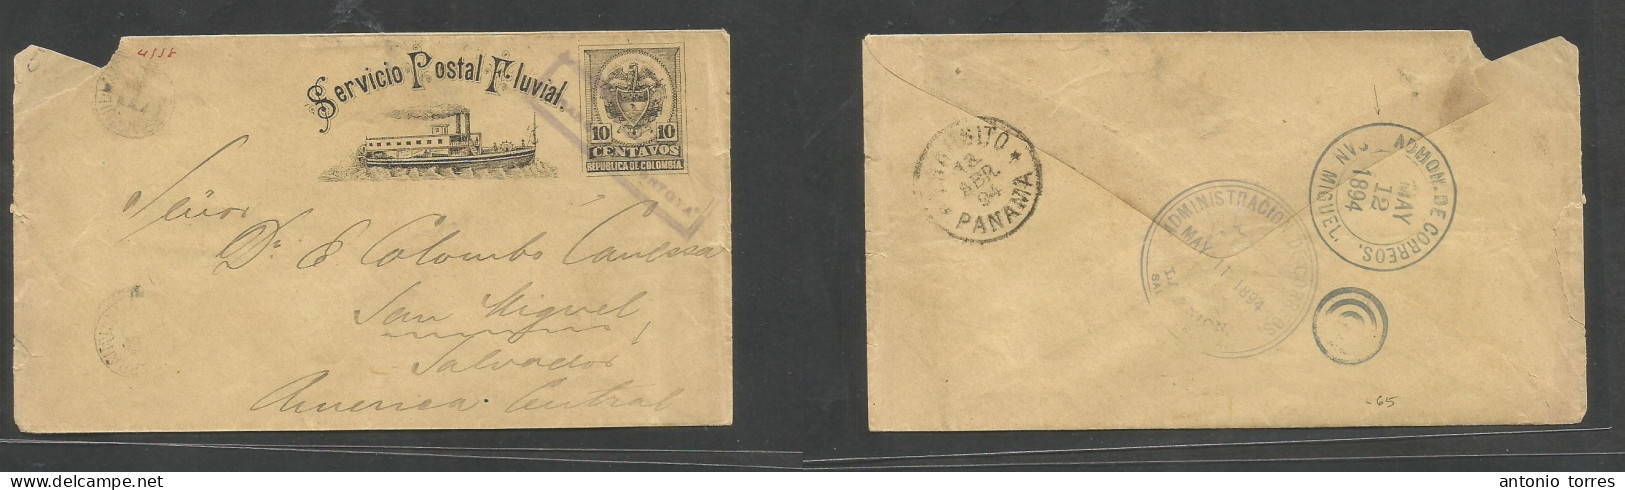 Colombia. 1894 (April) La Union - Salvador, Central America (12 May) 10c Black / Yellow Stationary Ship Design Envelope, - Colombia